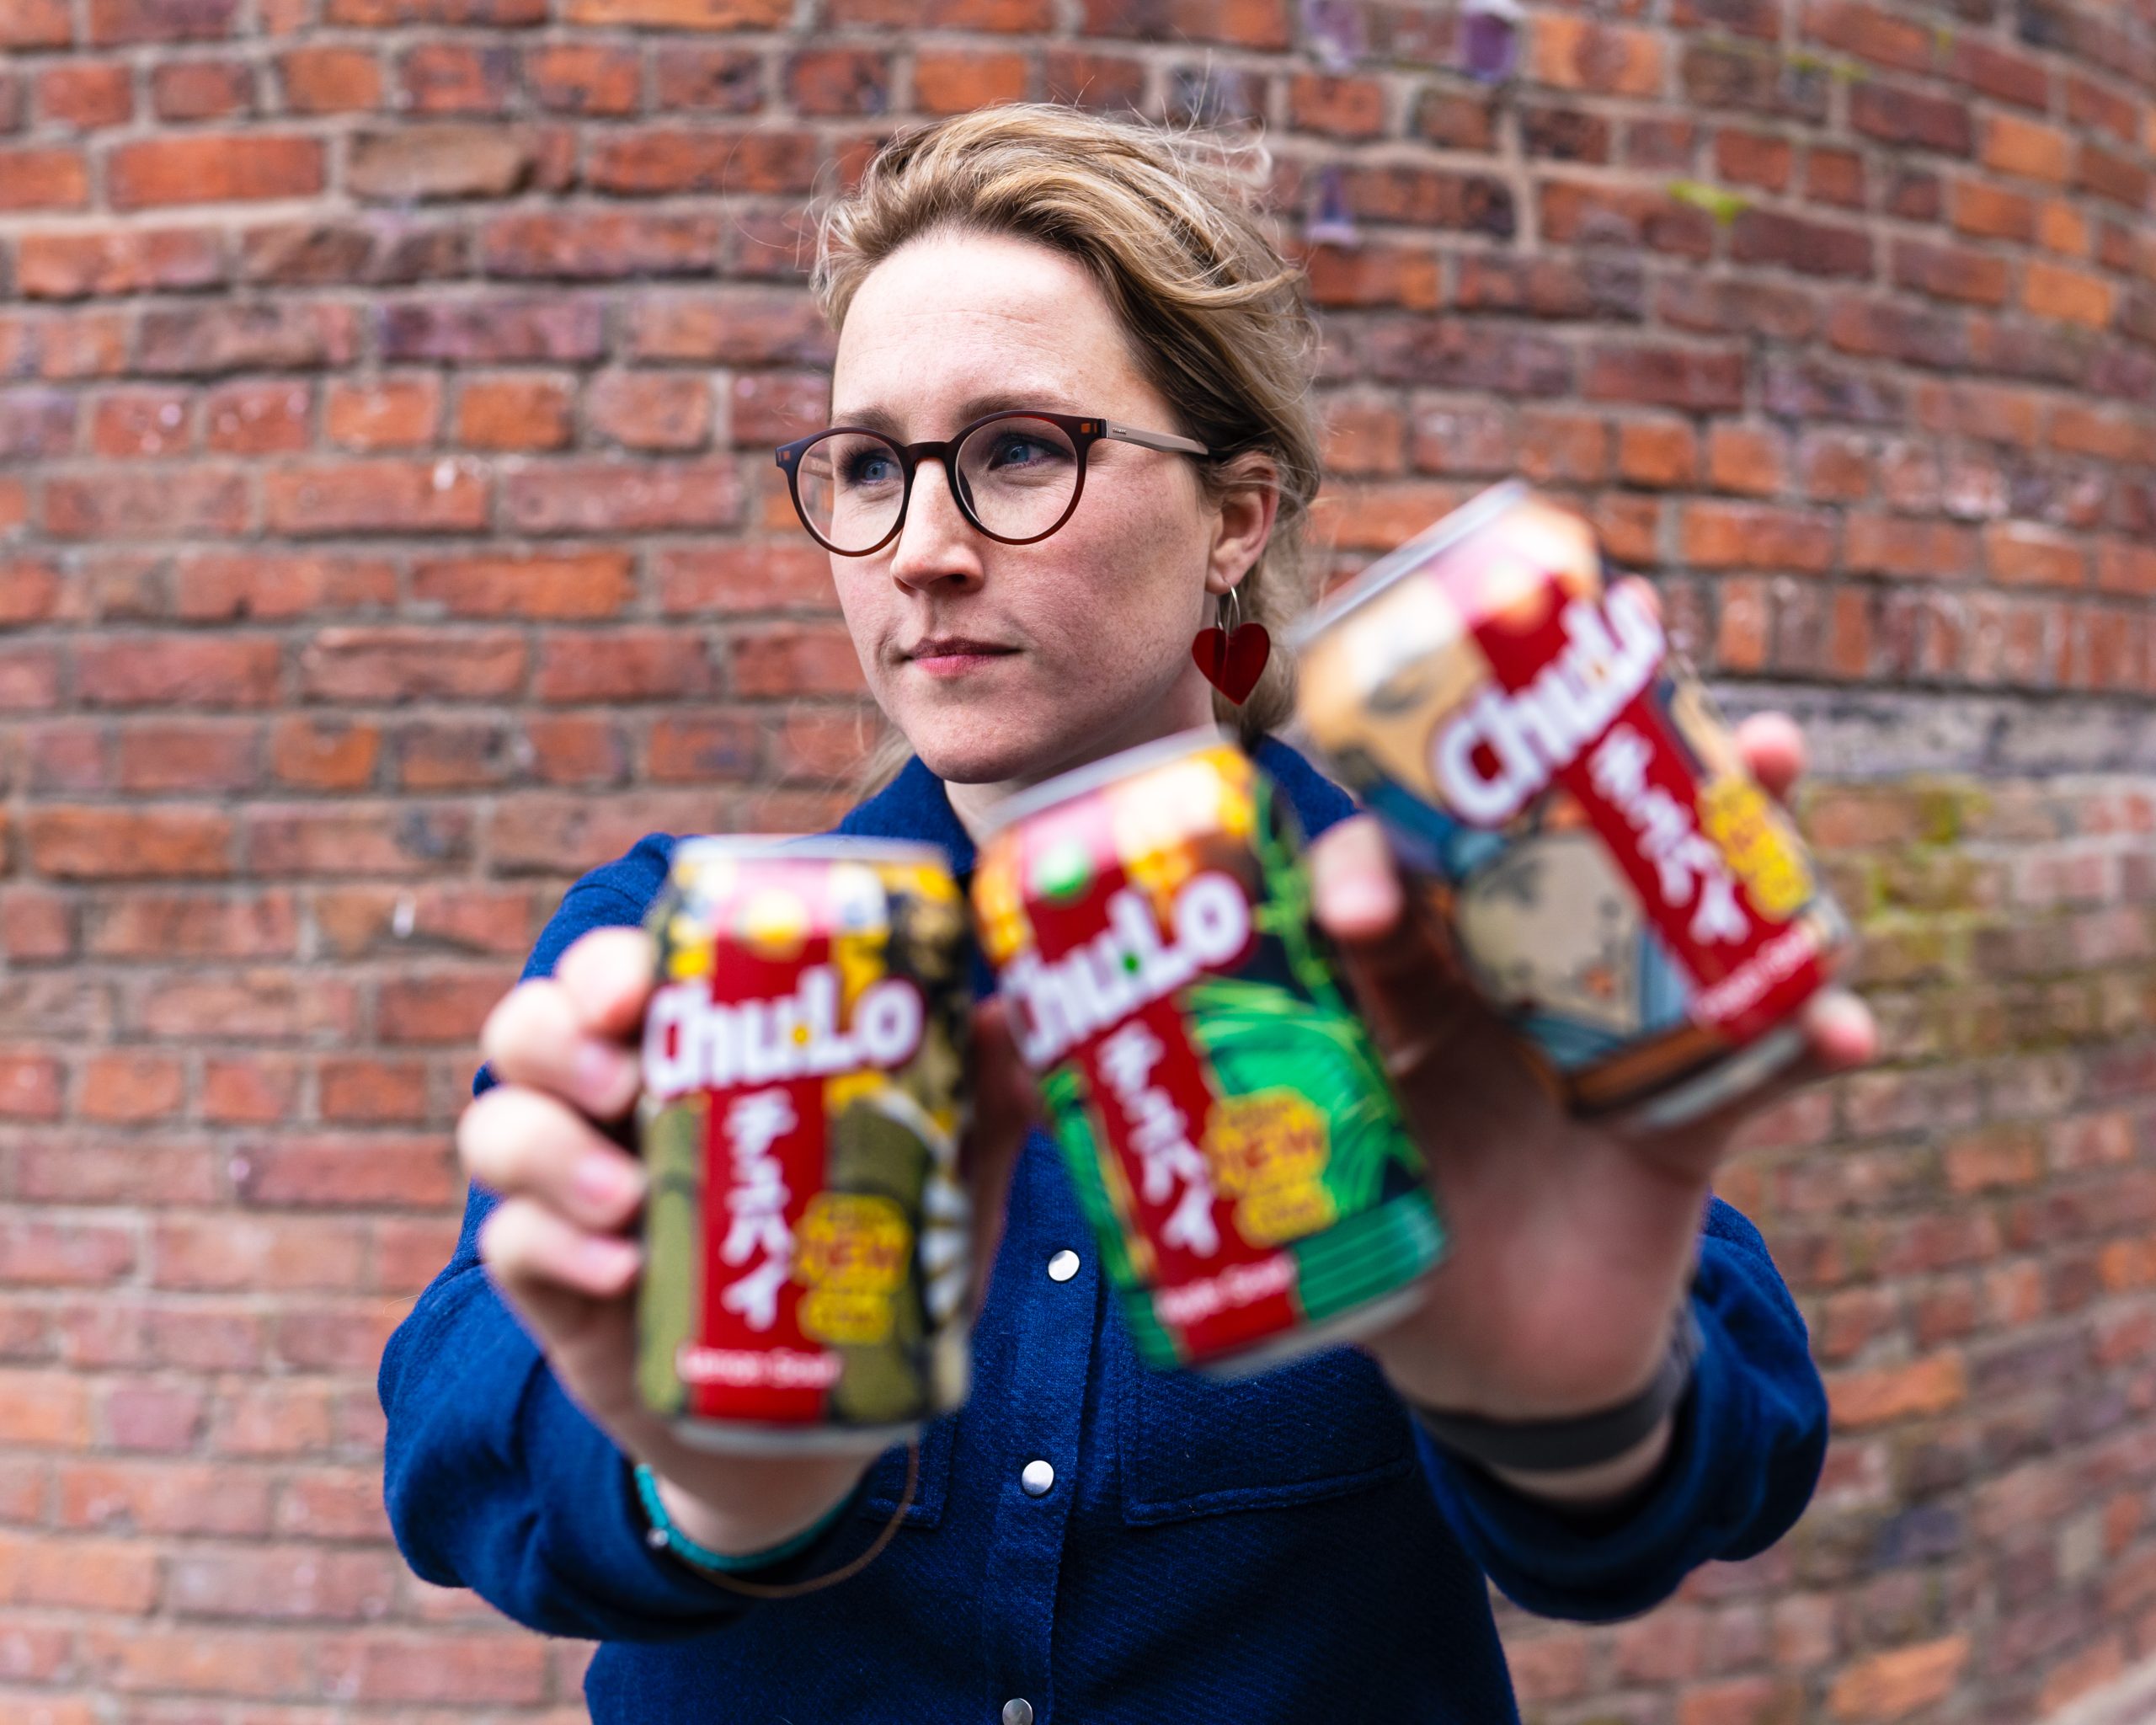 The ex-Royal Navy officer from Manchester with her own Japanese soft drink empire, The Manc